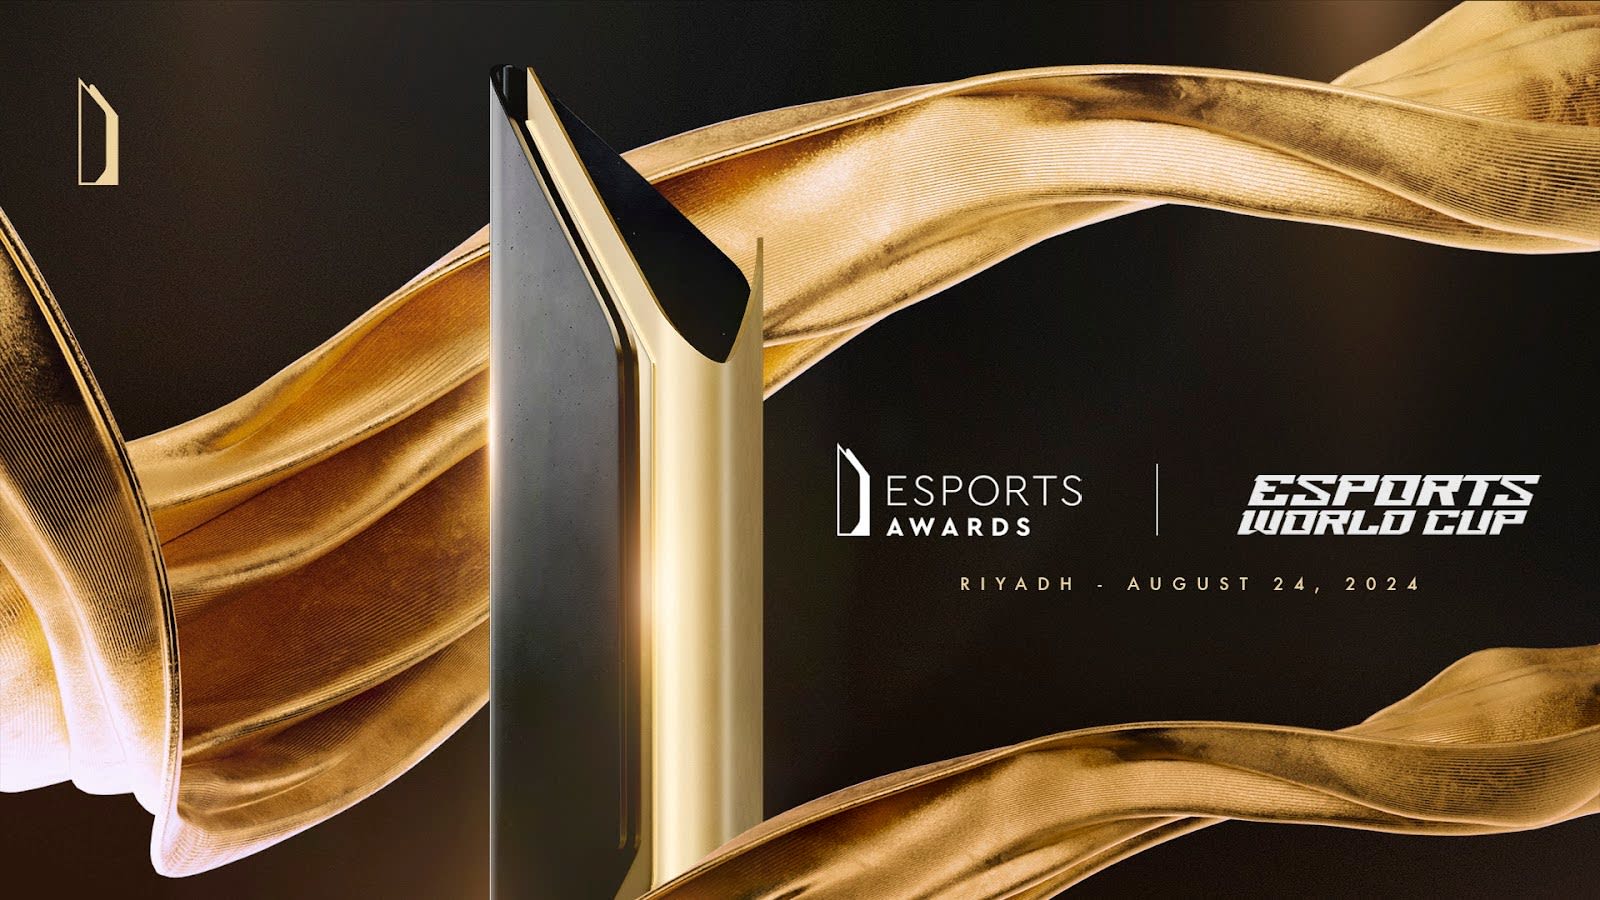 Esports Awards CEO discusses new partnership with Esports World Cup